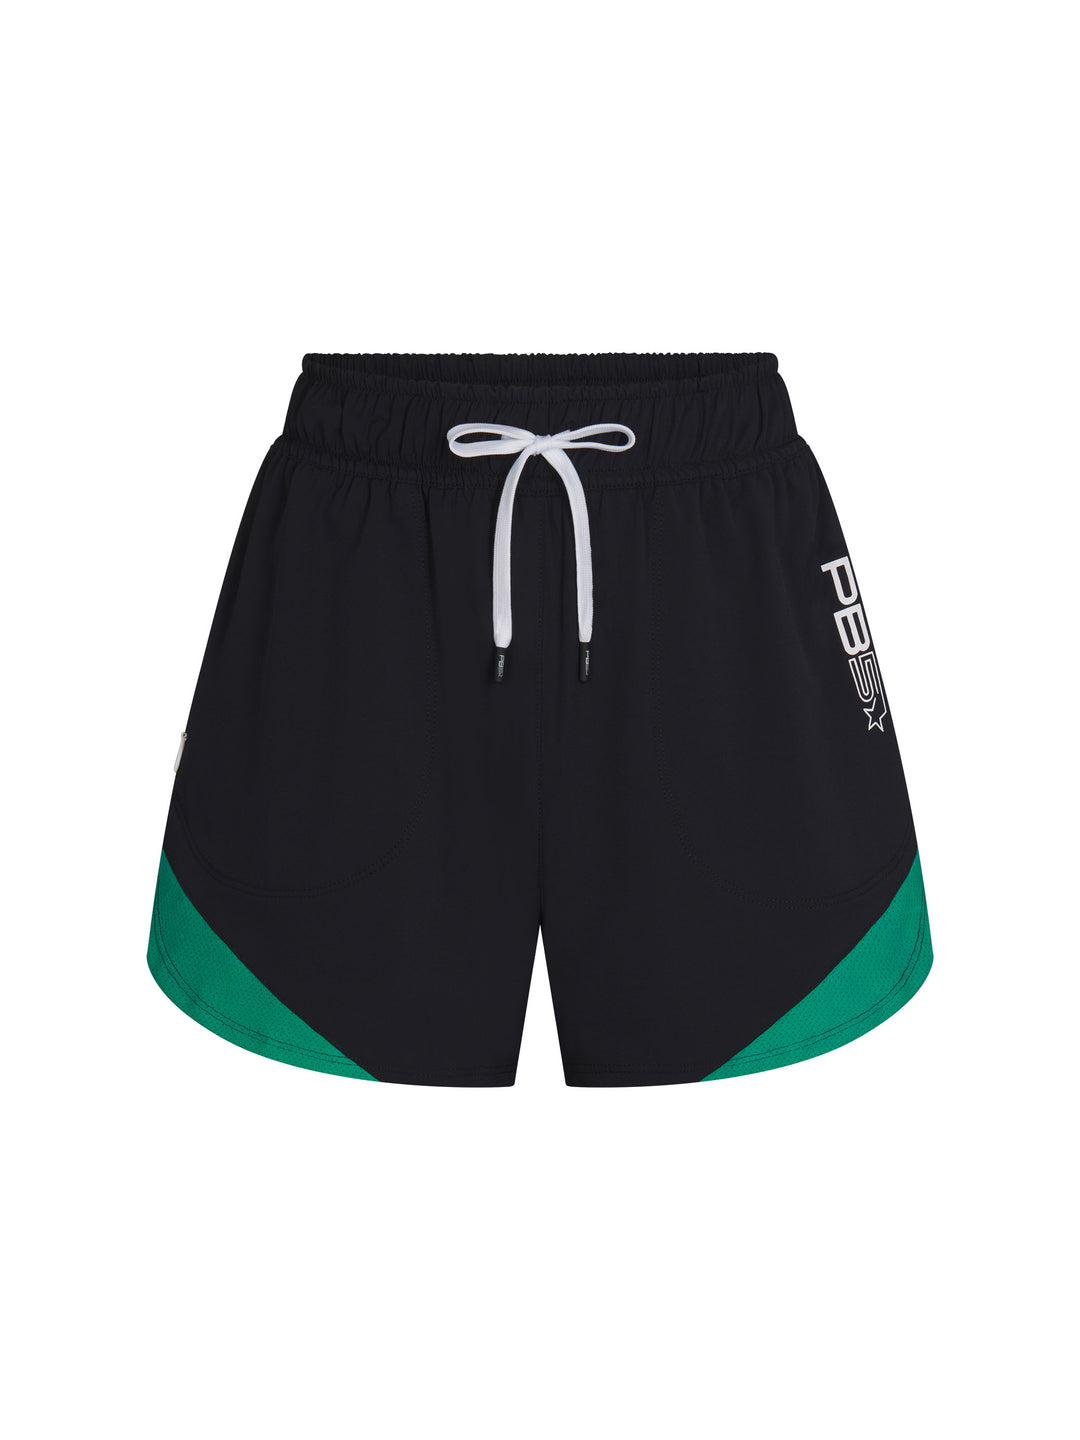 Women's Vented Court Short front view in Black and Jade. Logo on left side seam.